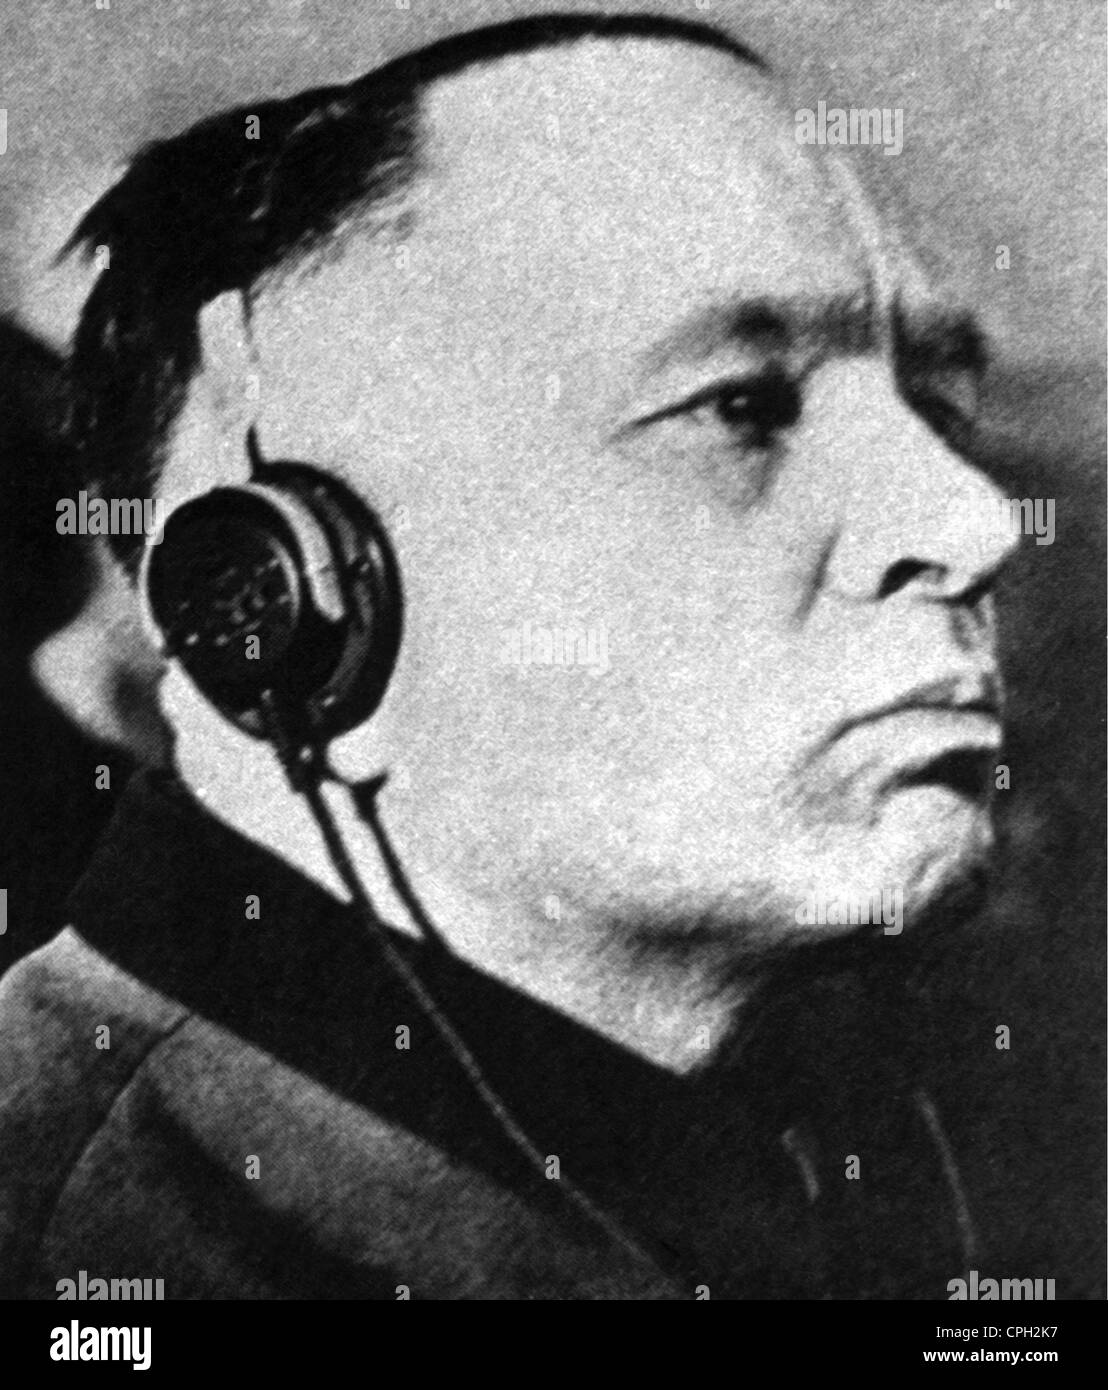 Hoess, Rudolf, 22.11.1900 - 16.4.1947, German SS officer, Commandant of Auschwitz-Birkenau May 1940 - November 1943, portrait, during his trial in Warsaw, Poland, 1946, Stock Photo